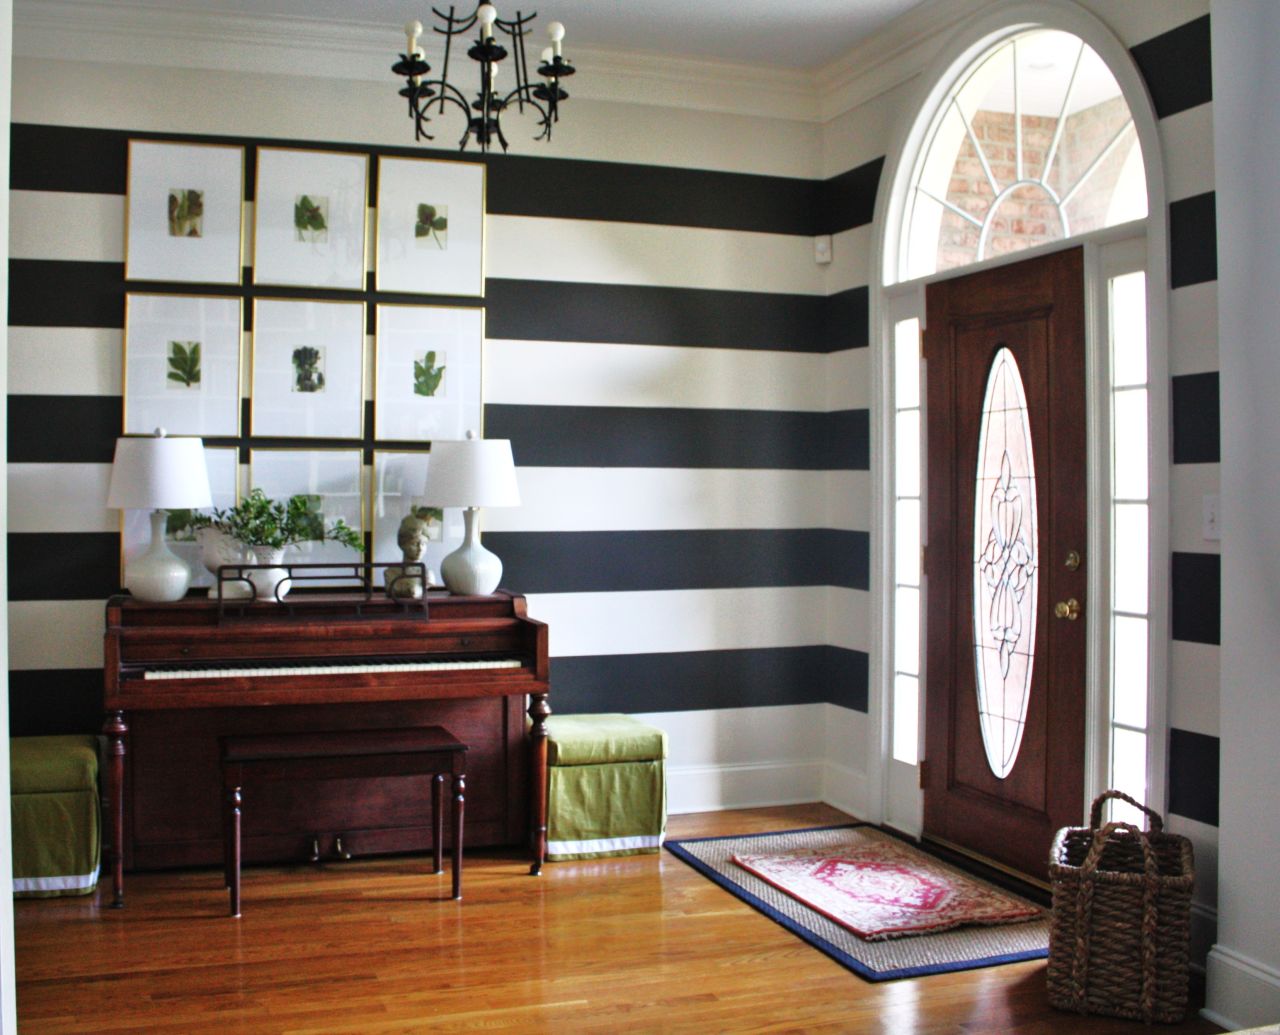 <a href="http://ireport.cnn.com/docs/DOC-986389">Emily Clark'</a>s bold, striped foyer -- which also functions as a music room -- in Charlotte, North Carolina, is a playful take on formal decor.